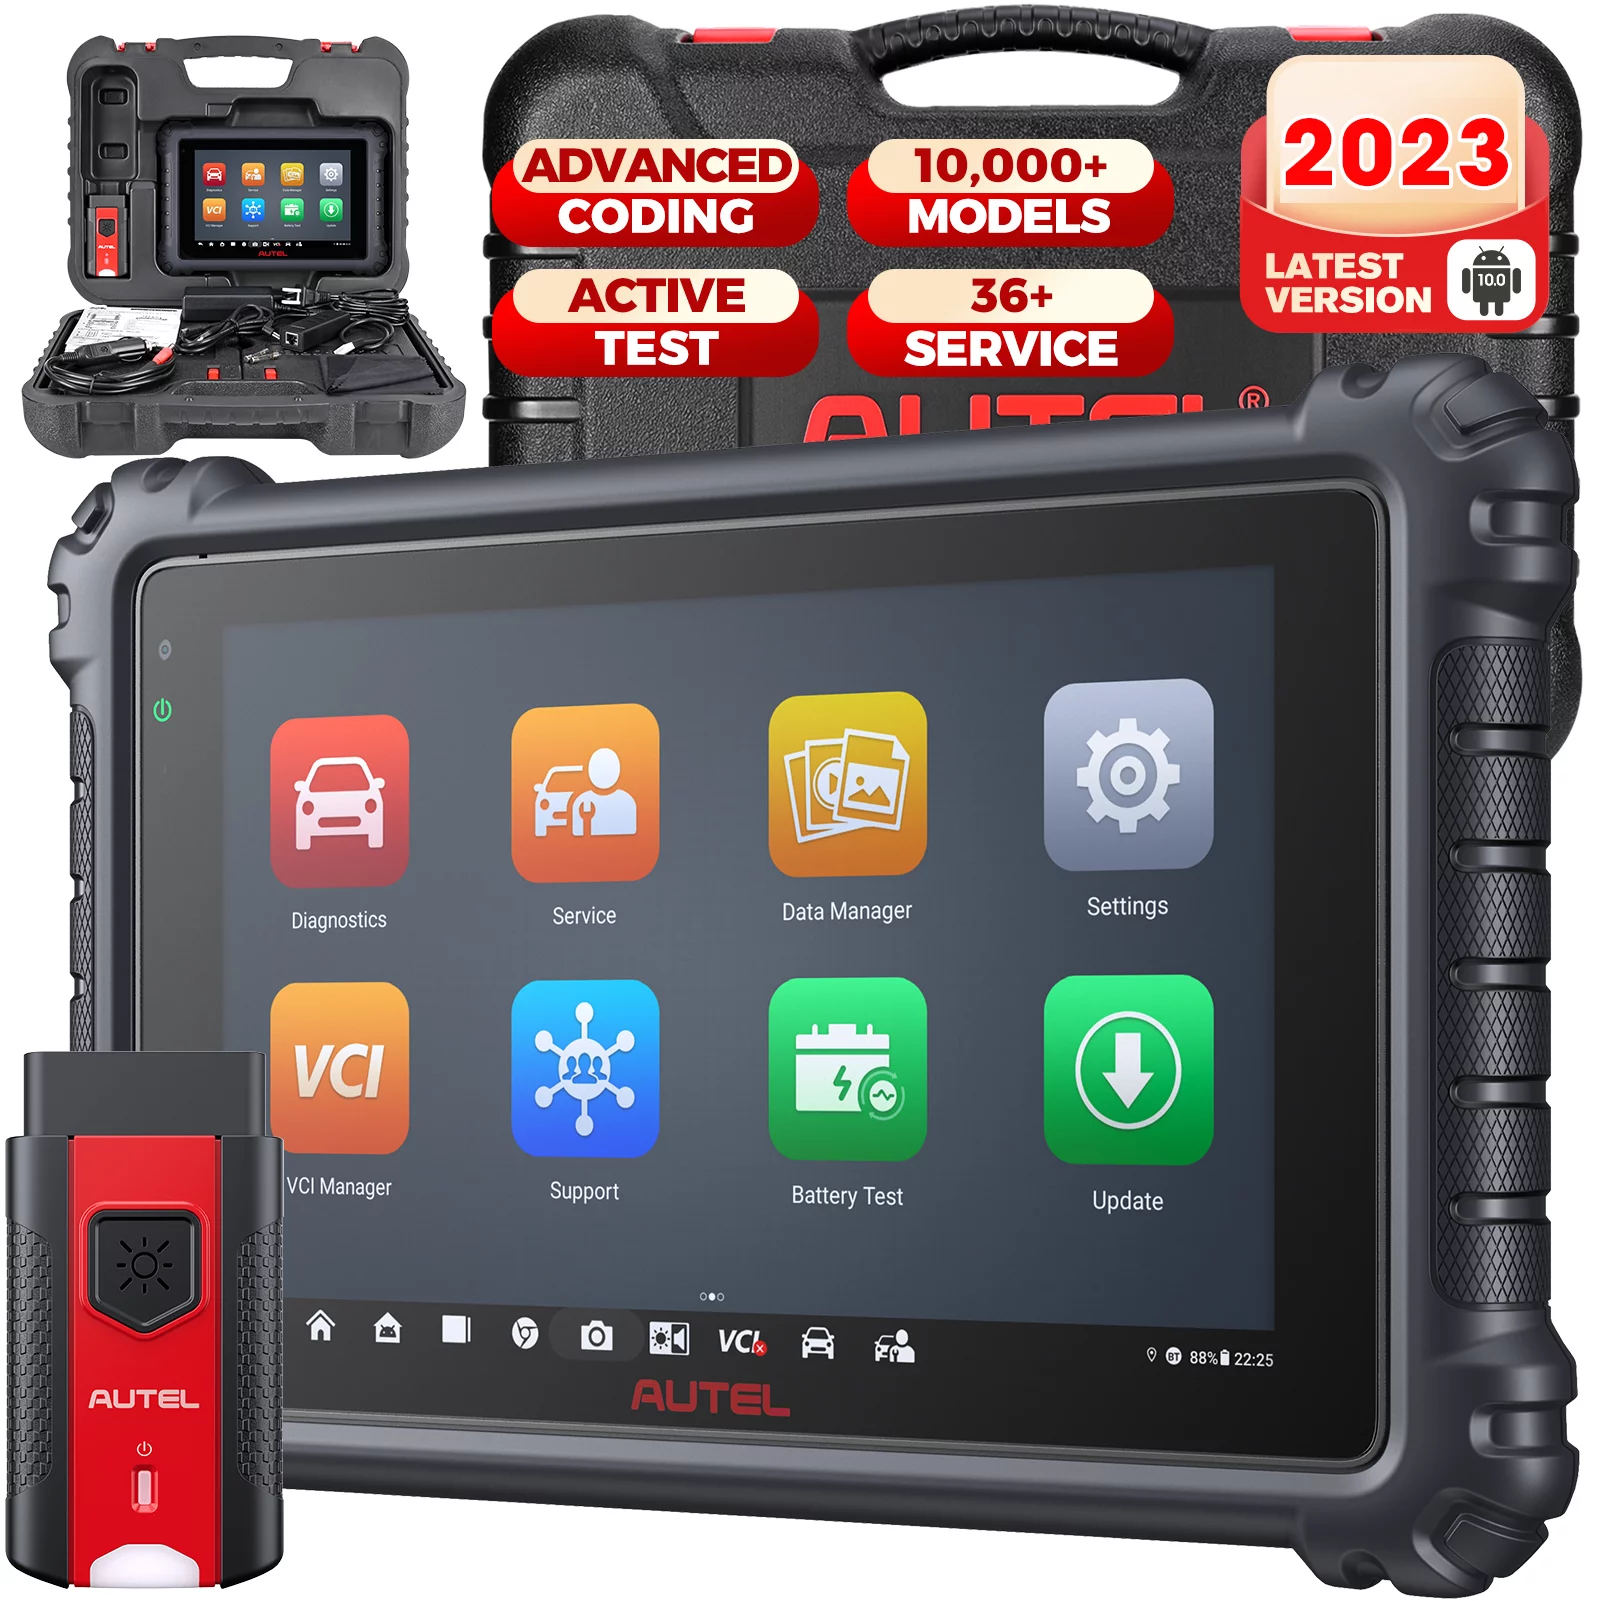 Autel MaxiSys MS906 Pro Car Diagnostic Tool, ECU Coding & Bidirectional, code reader, obd2 scanner, diagnostic scan tool, 2022 Upgraded of MS908 MK908 MS906BT MK906BT, CAN FD/ DoIP, 36+ Resets & OE All Systems Scan, FCA Autoauth, with $60 MV108